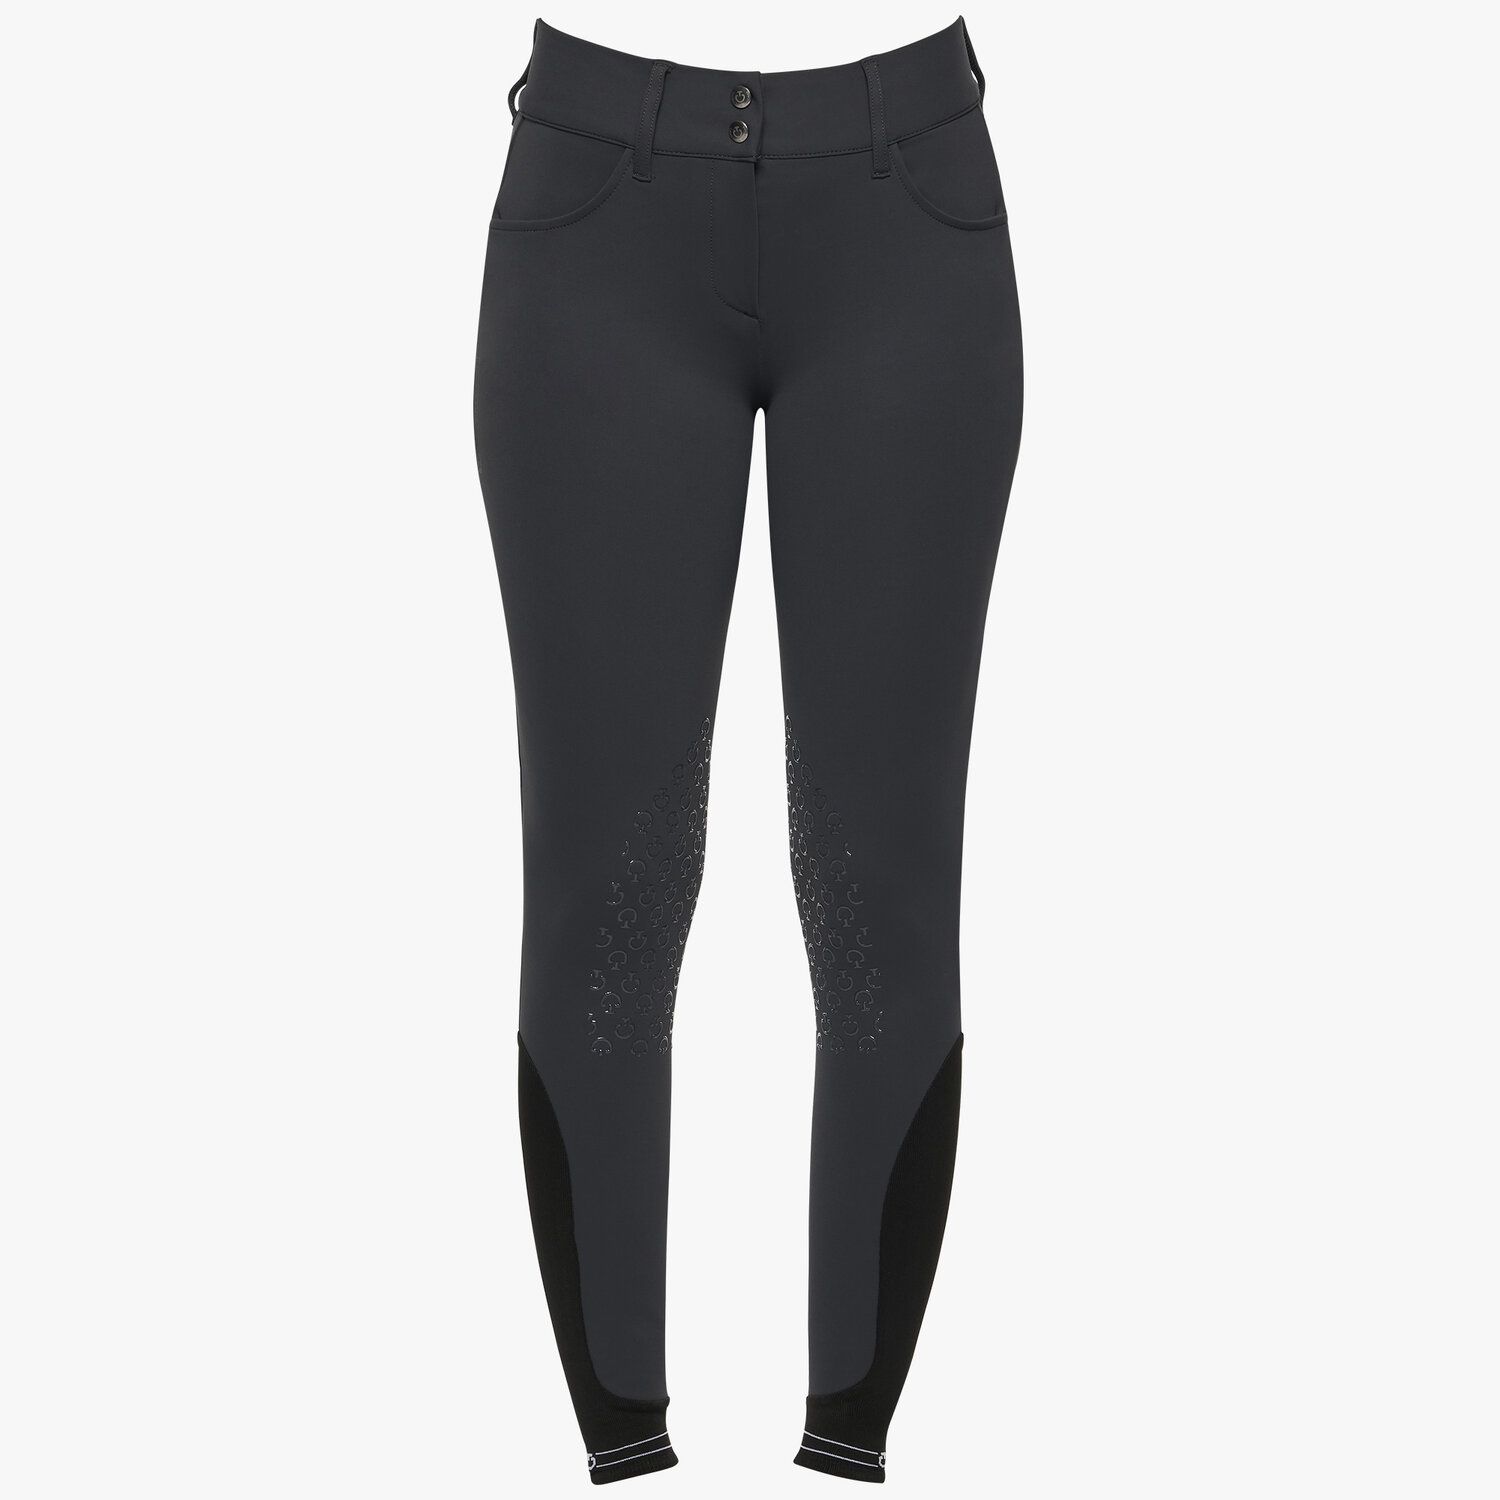 Cavalleria Toscana Women's dressage breeches with perforated logo tape CHARCOAL GREY-2